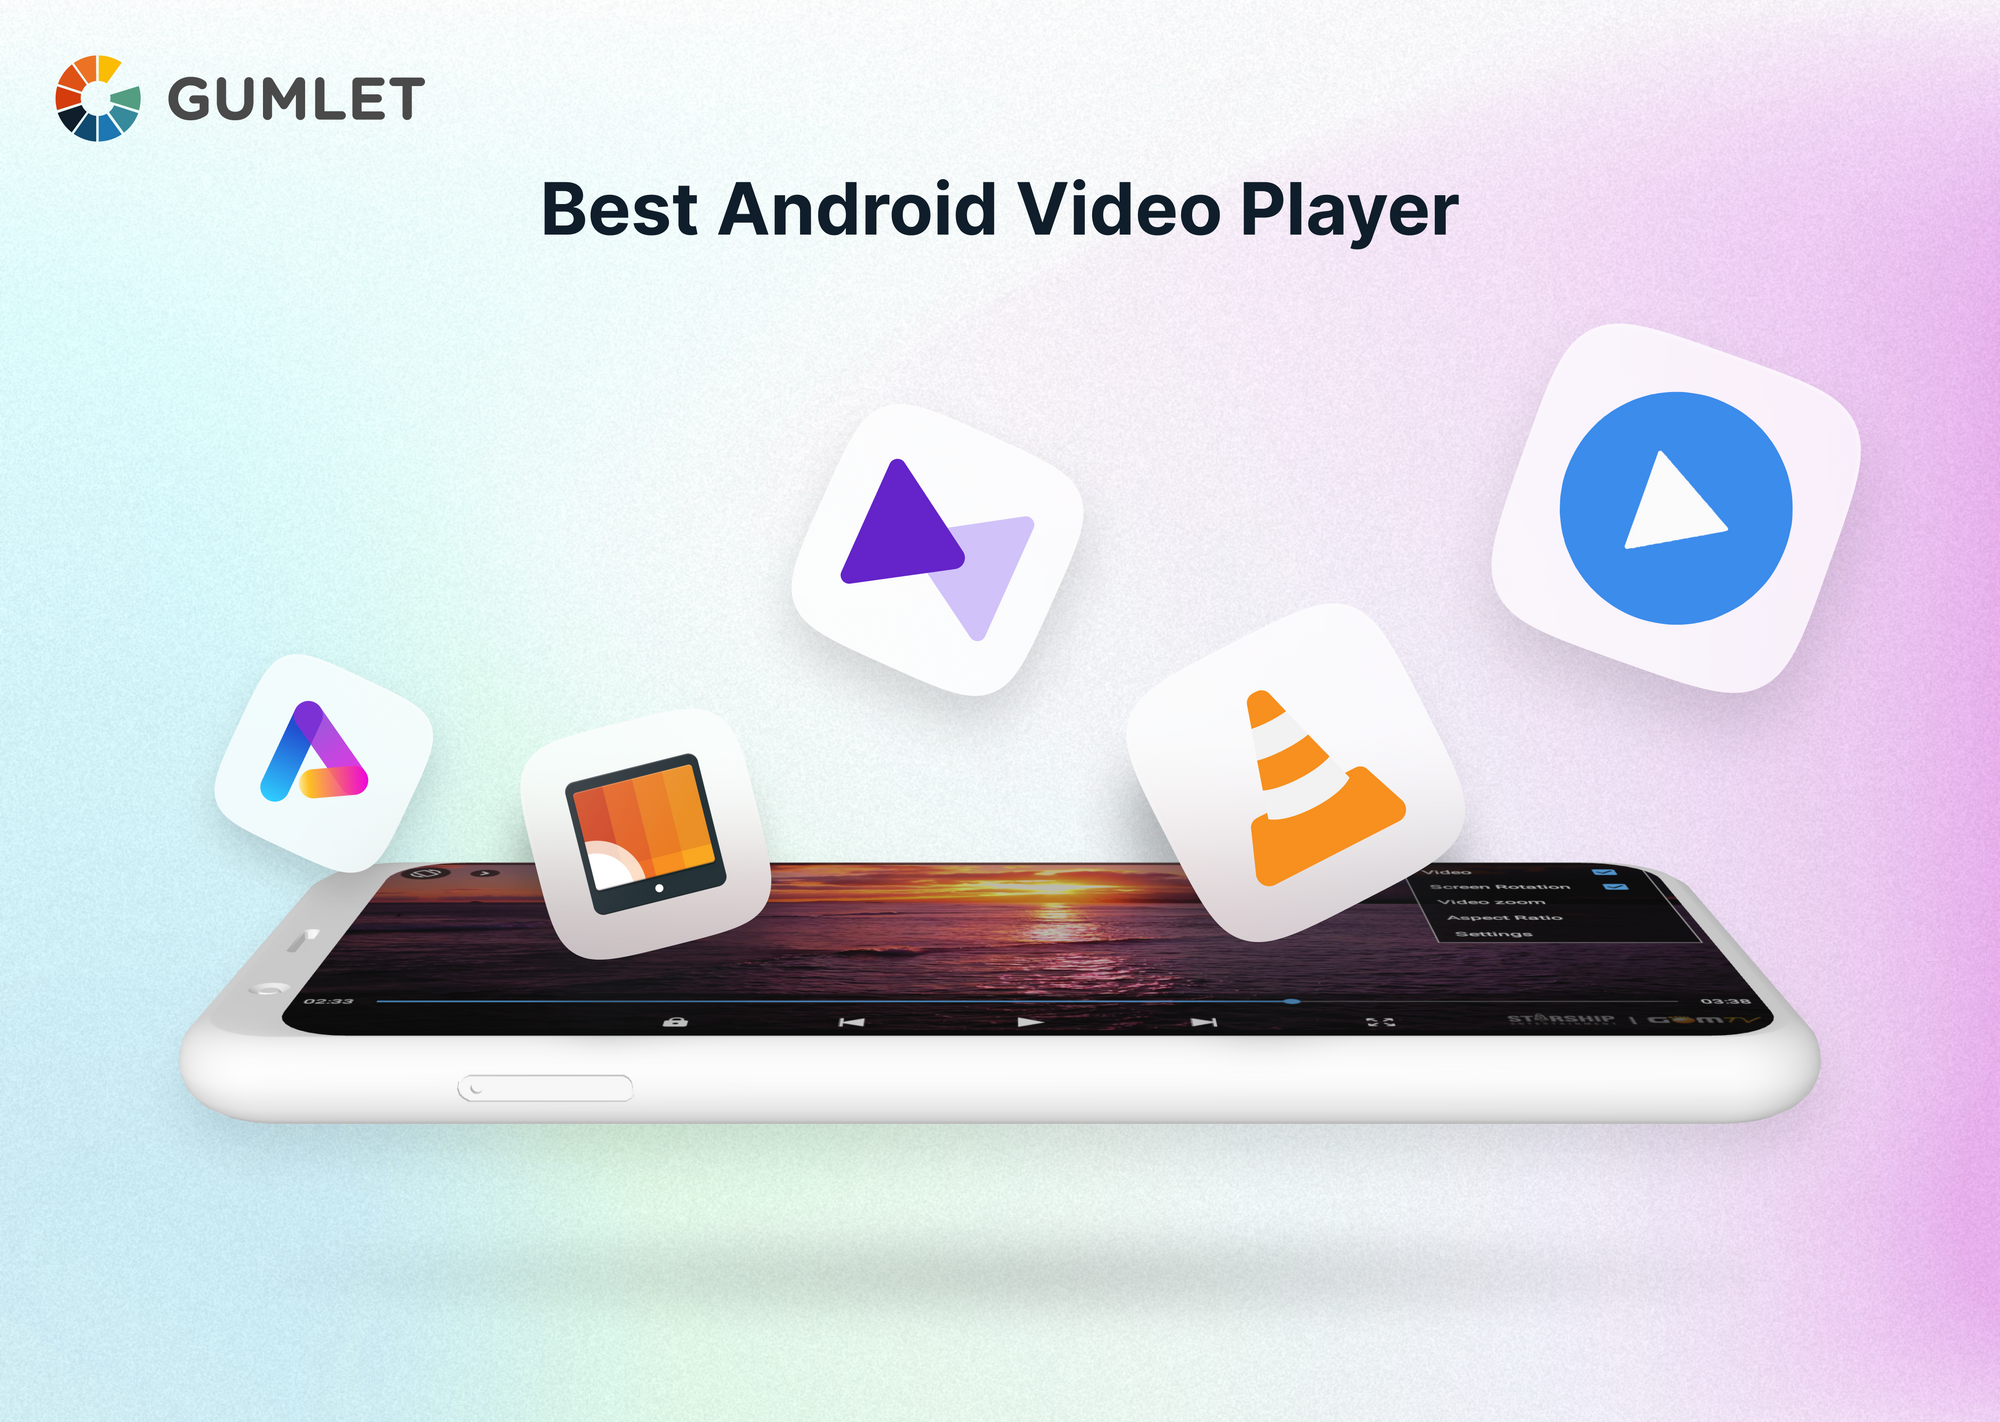 Video Player - Watch It Now APK (Android App) - Free Download